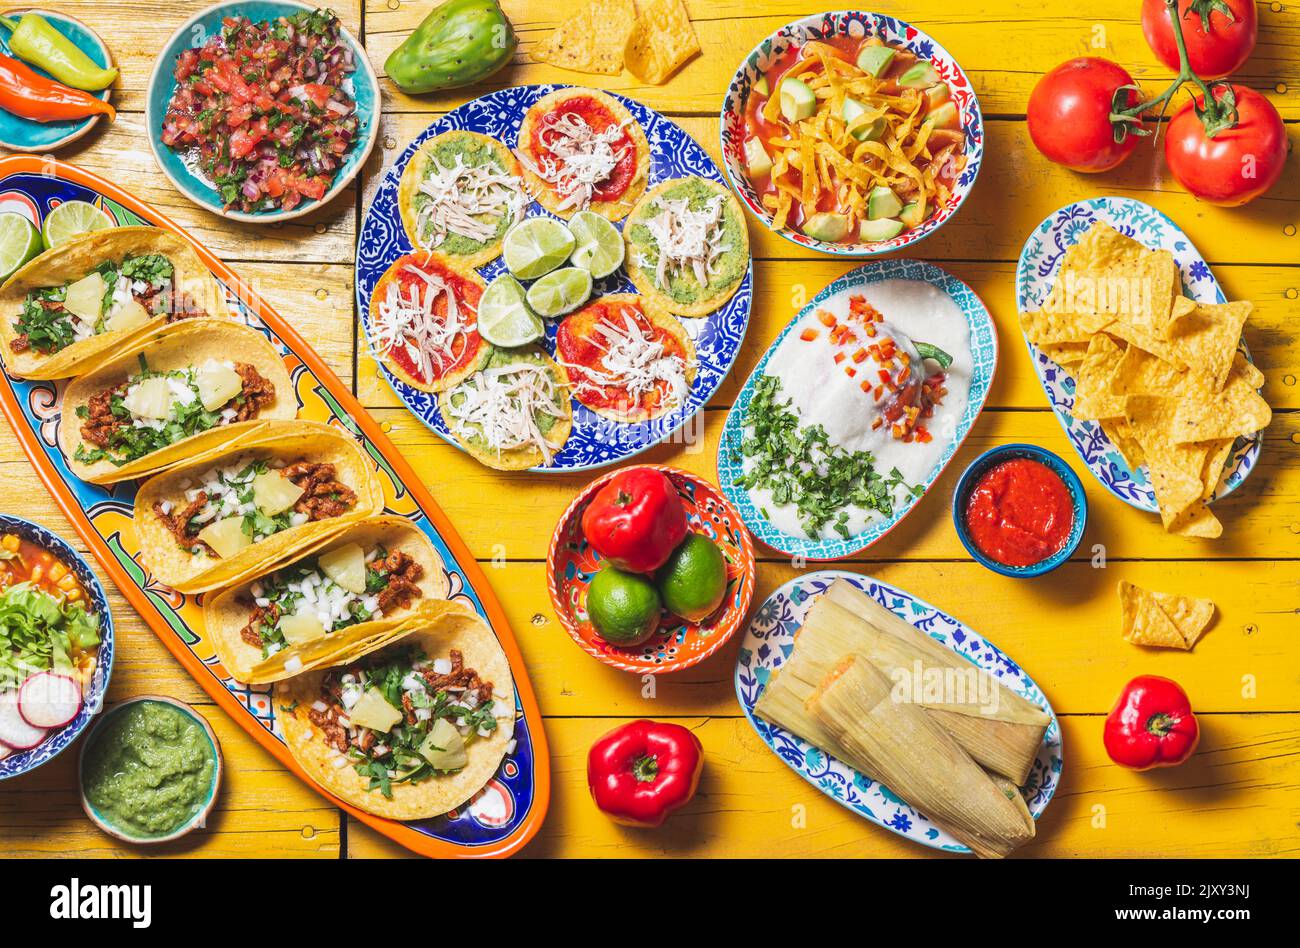 Mexican festive food for independence day - independencia chiles en nogada, tacos al pastor, chalupas pozole, tamales, chicken with mole poblano sauce Stock Photo